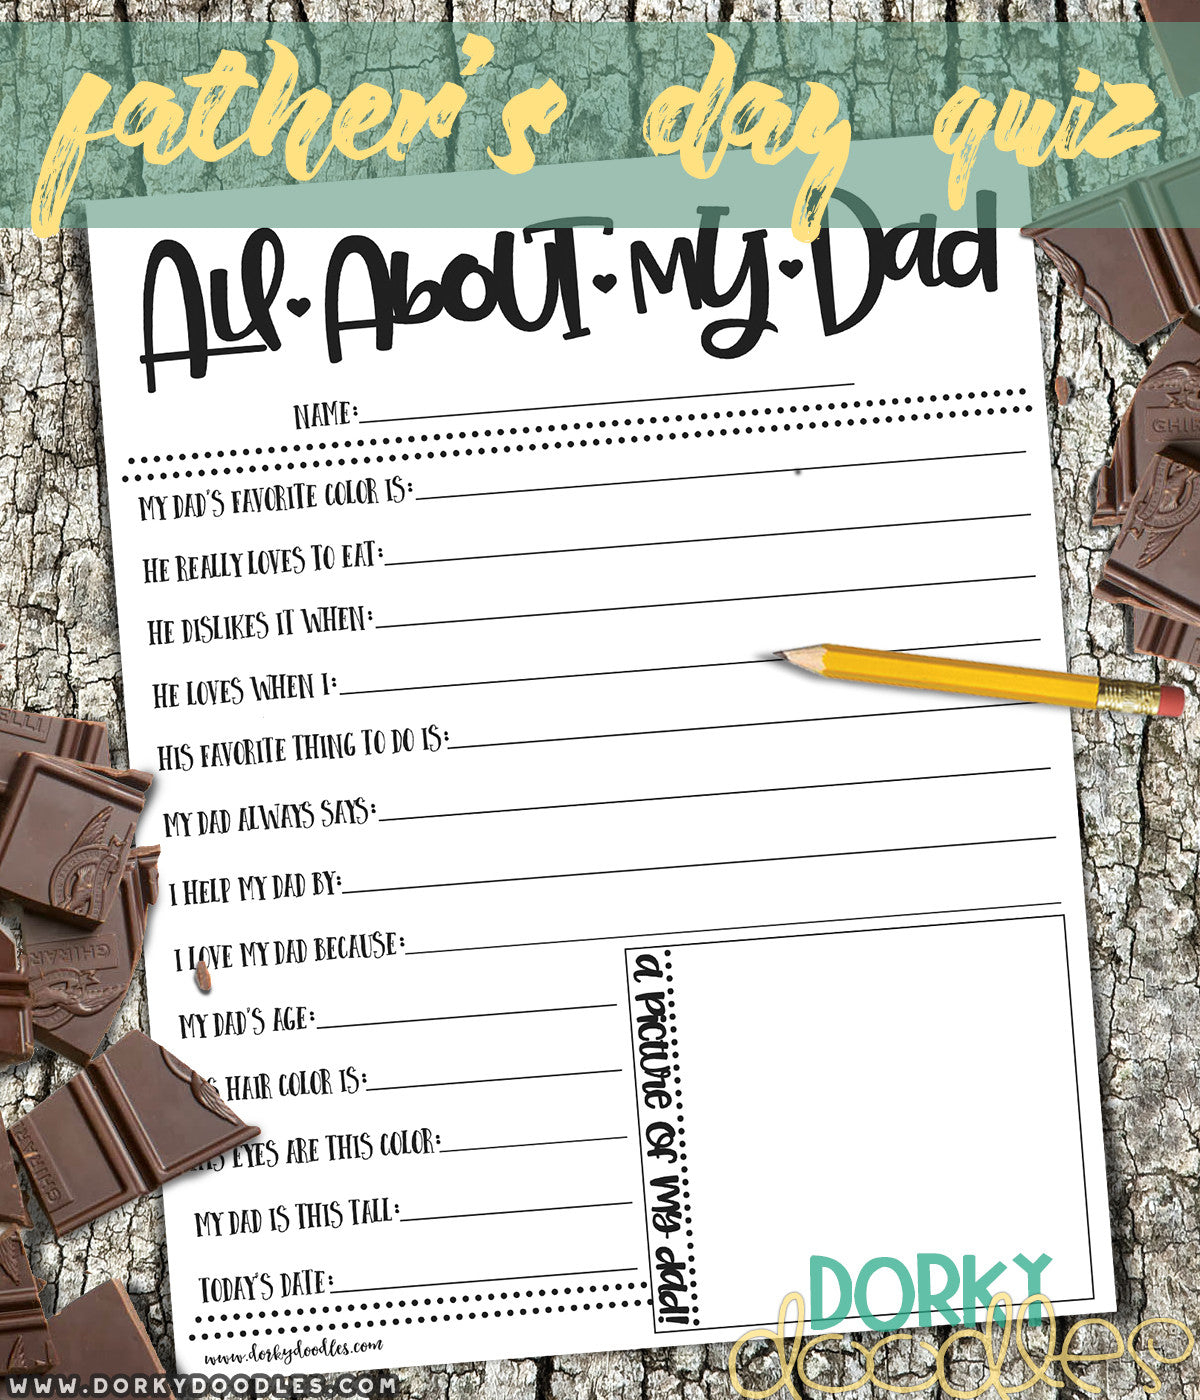 all about my dad printable quiz